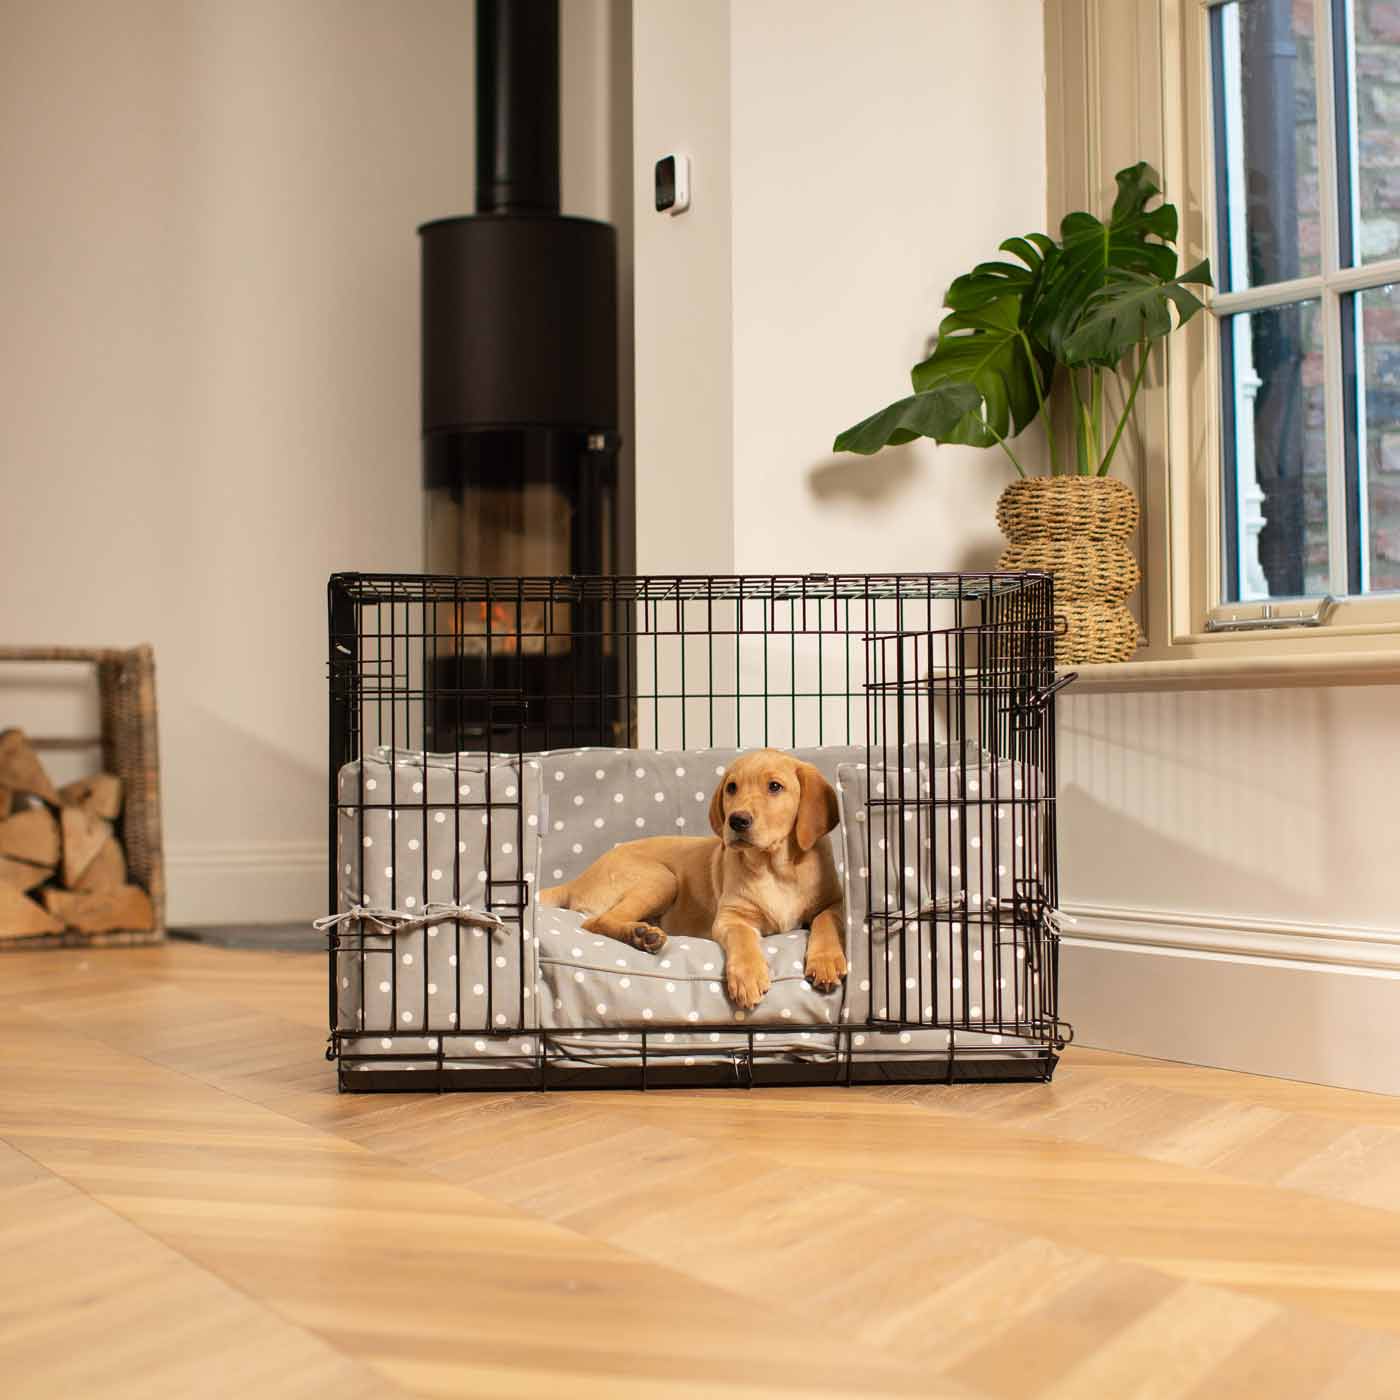 Luxury Dog Cage Bumper, Grey Spot Bumper Cover, The Perfect Dog Cage Accessory, Available To Personalize Now at Lords & Labradors US